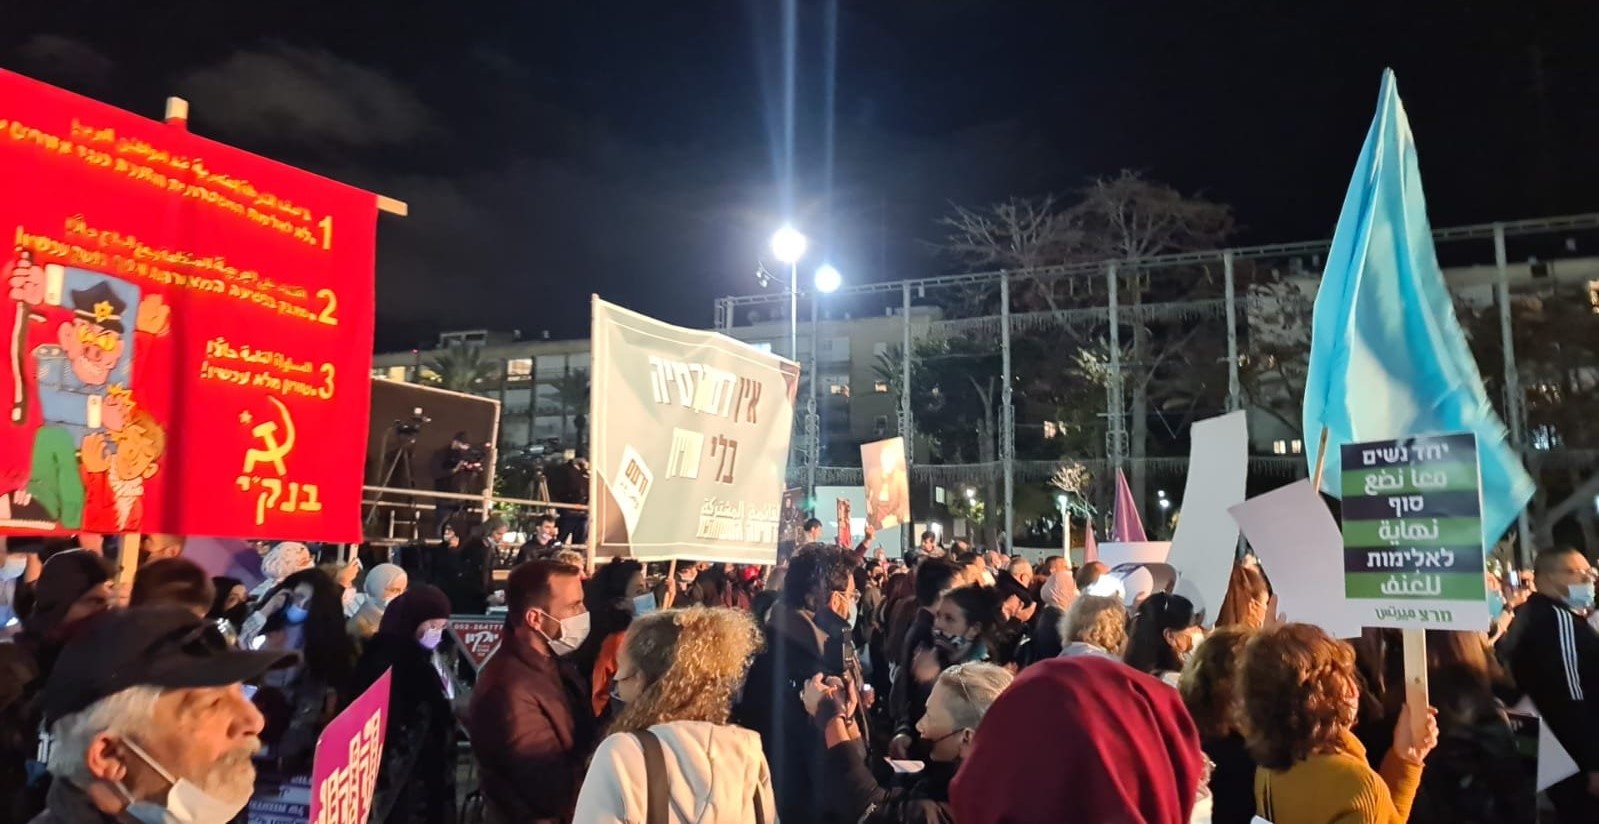 Demonstrators in Tel Aviv's Rabin Square, protested the inaction of Israel's far-right government and police amidst the surging crime and violence in Arab communities, Thursday, March 18, 2021.